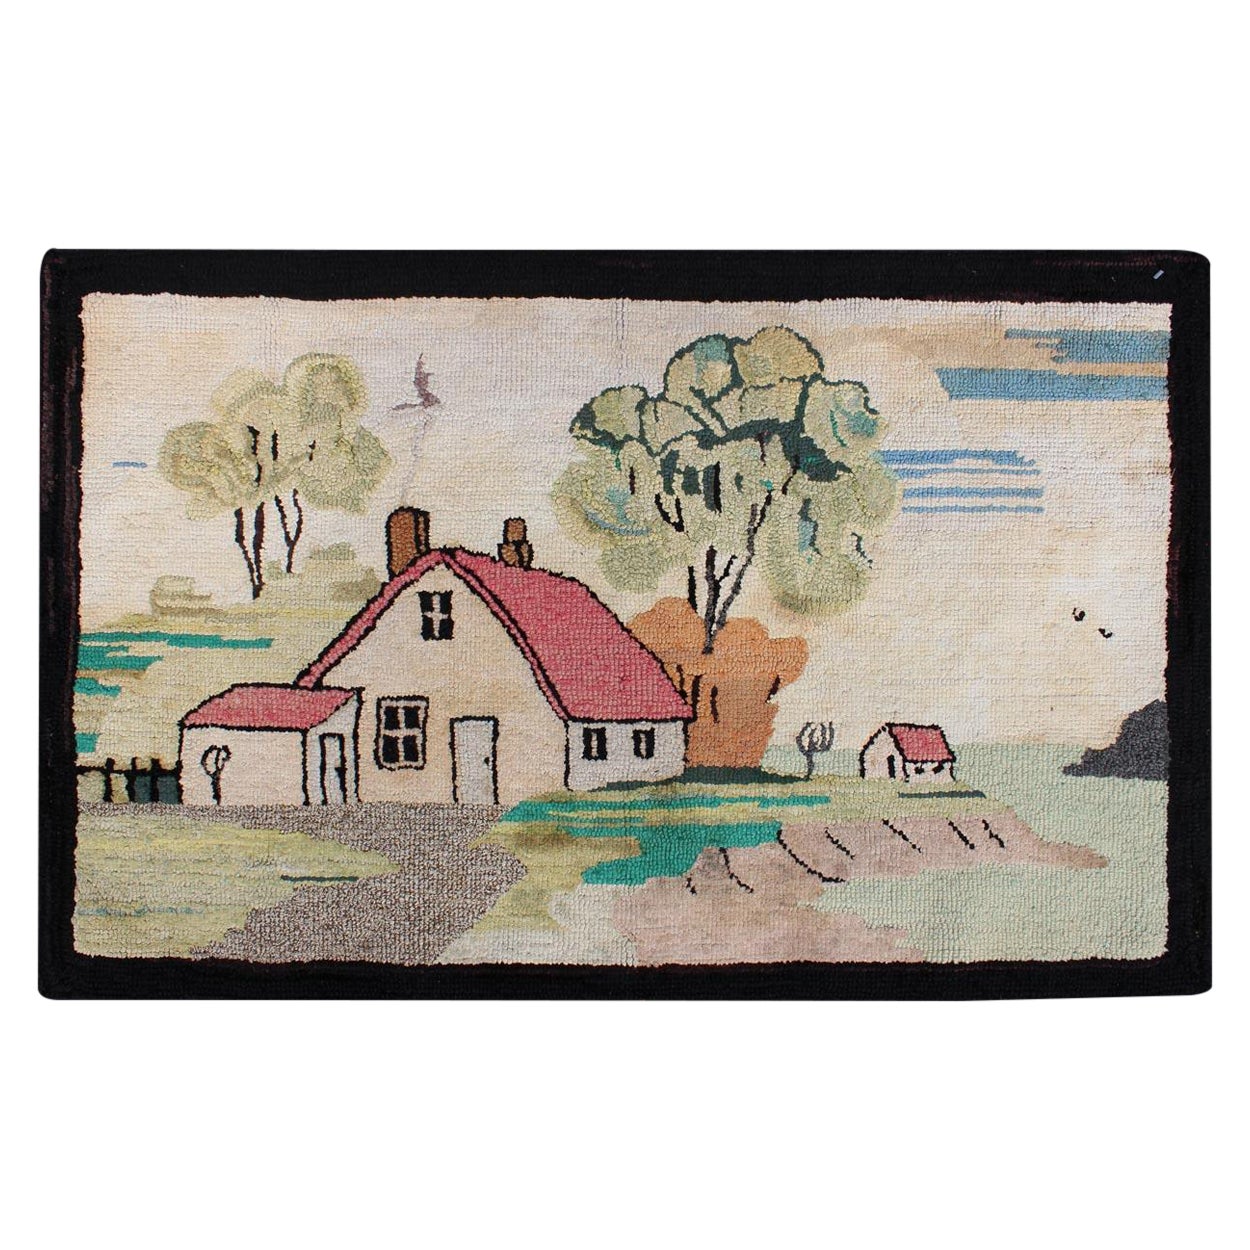 Pictorial Antique American Hooked Rug with Old Farm House Setting For Sale